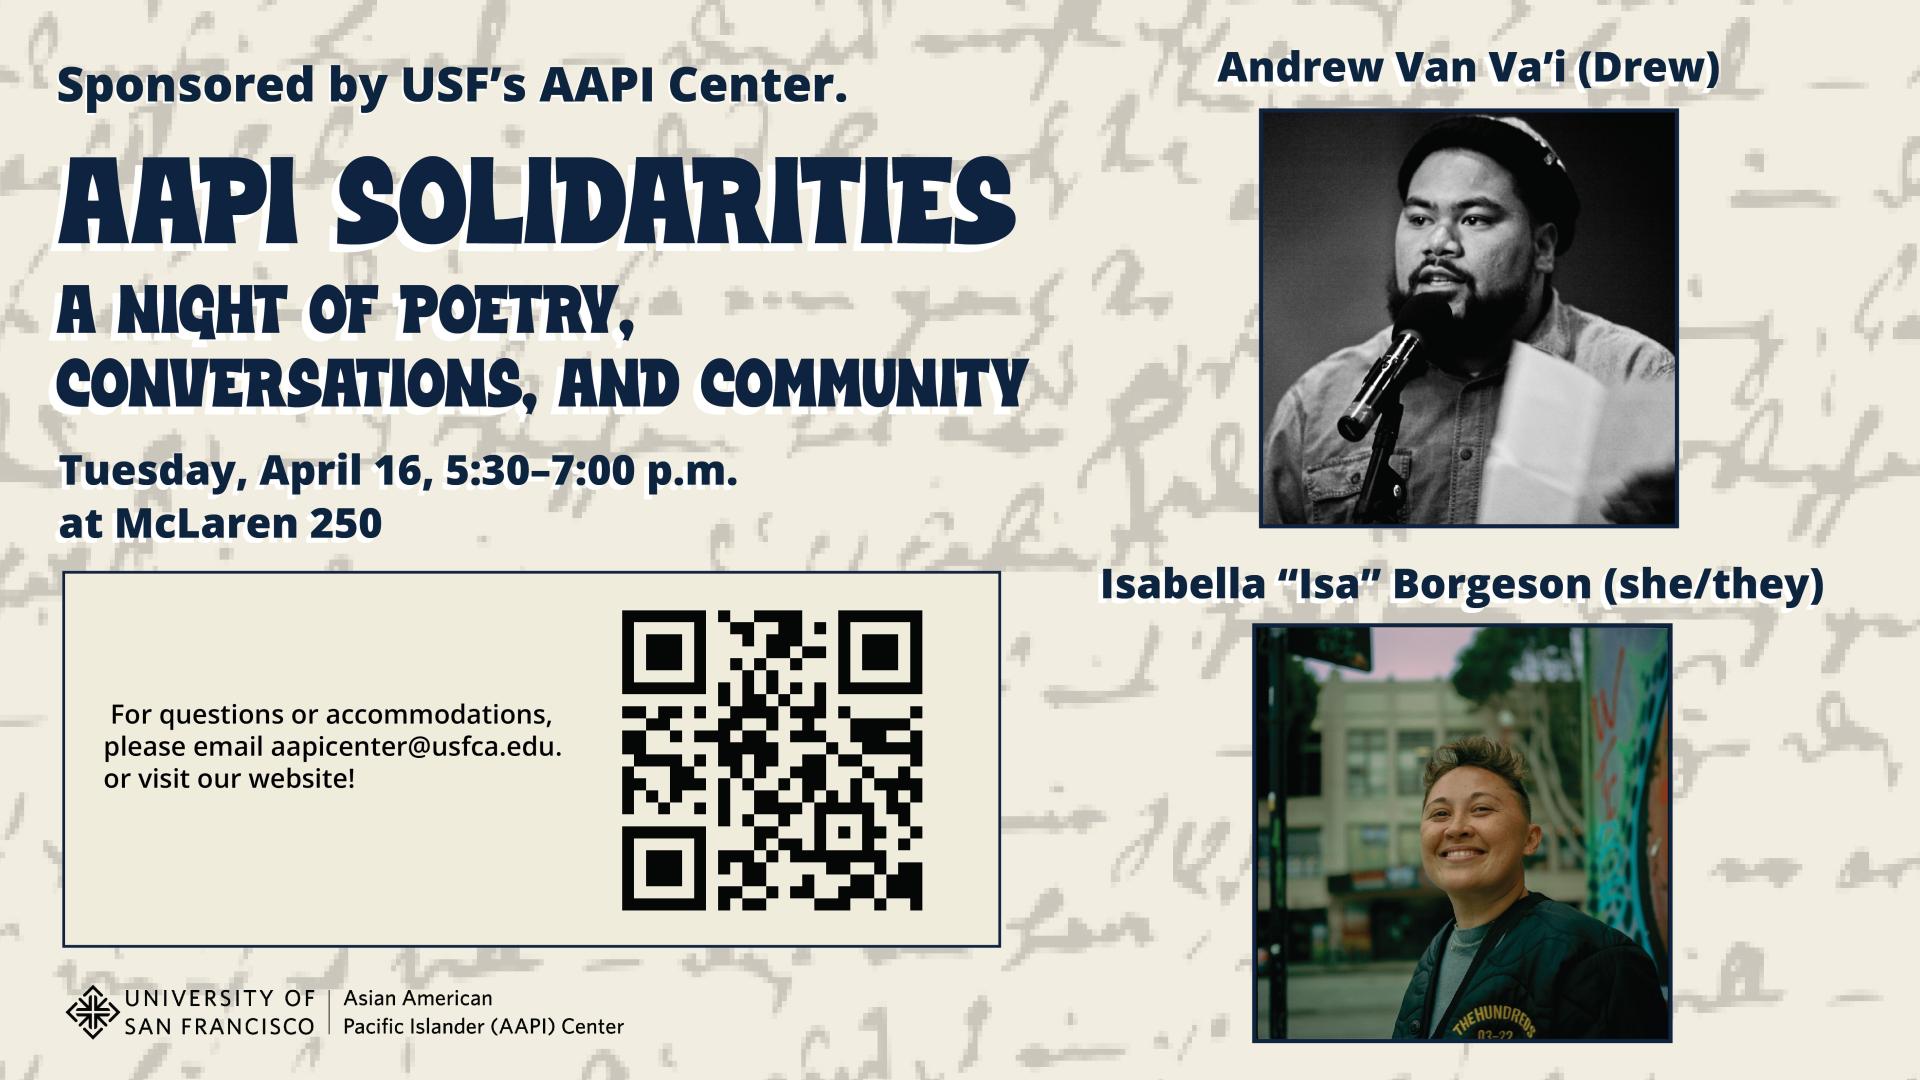 AAPI Solidarities: A Night of Poetry, Community, and Conversations with Isa Borgeson and Drew Va’i